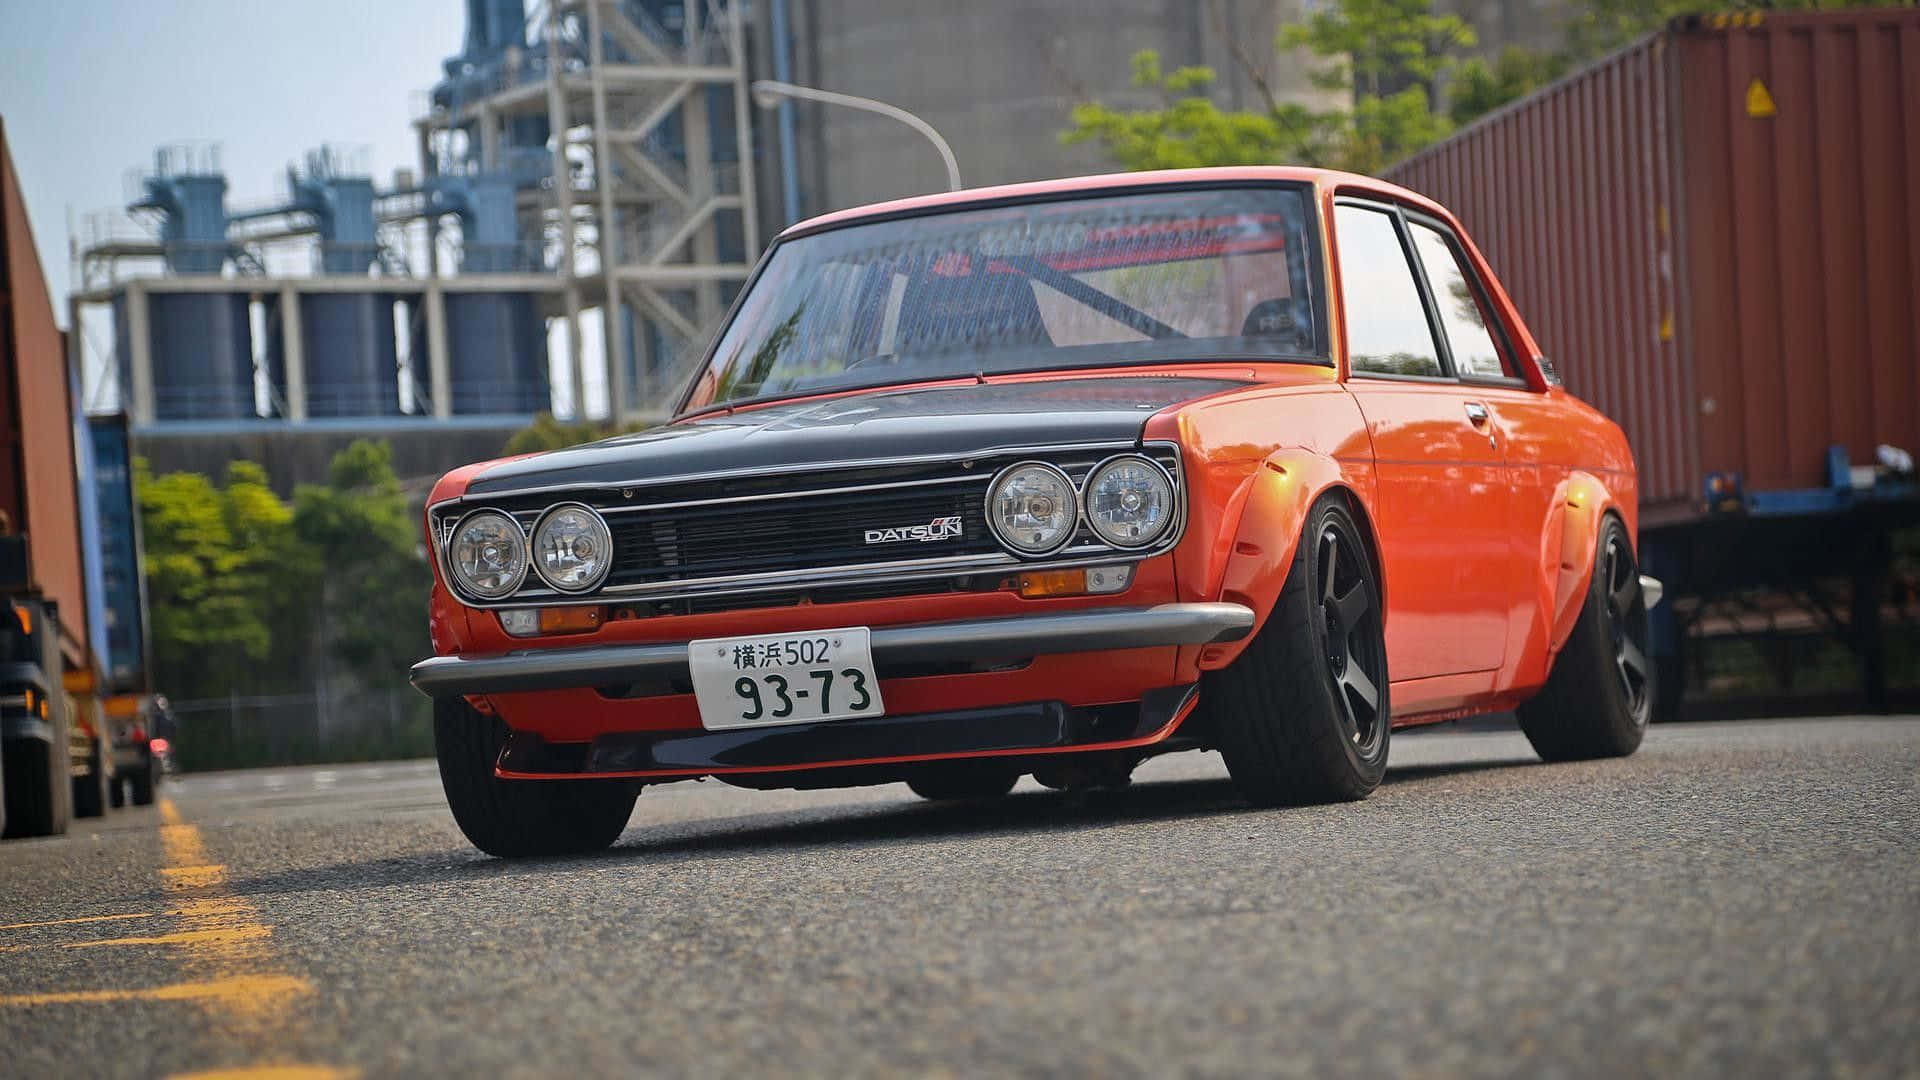 Stunning Datsun Car On The Road Background